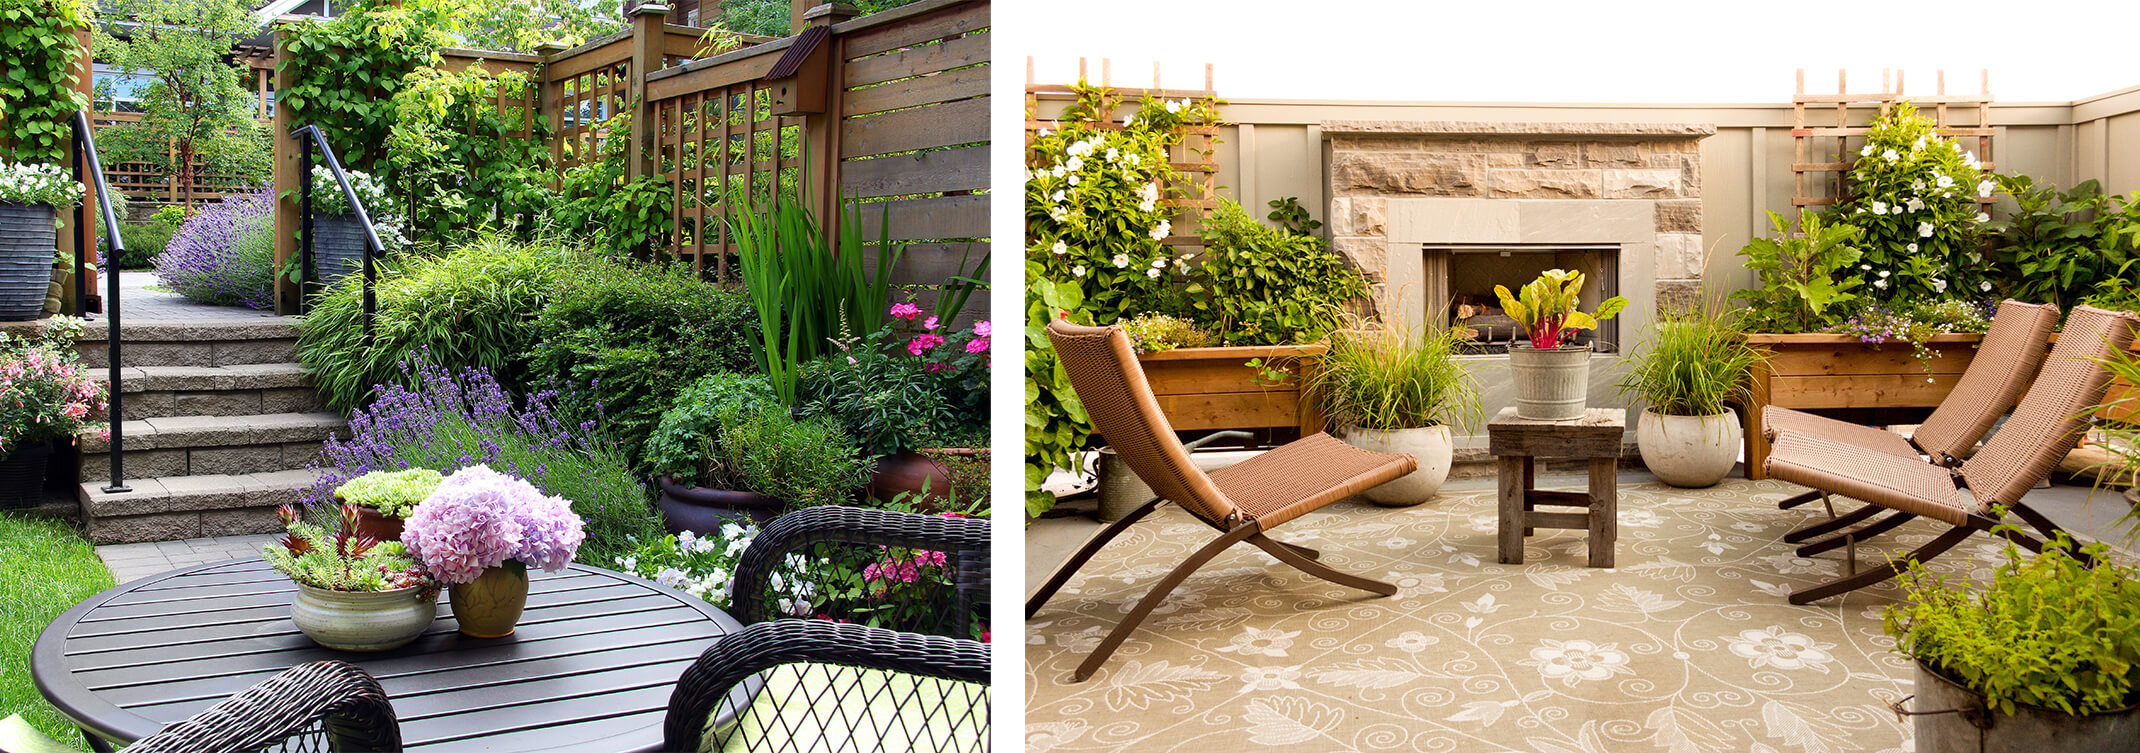 2 images: a backyard patio area with a wide variety of plants, including fragrant ones, seating wooden trellises and fencing and stairs; a patio with an outdoor rug and fireplace, seating and a wide variety of plants-including scented ones